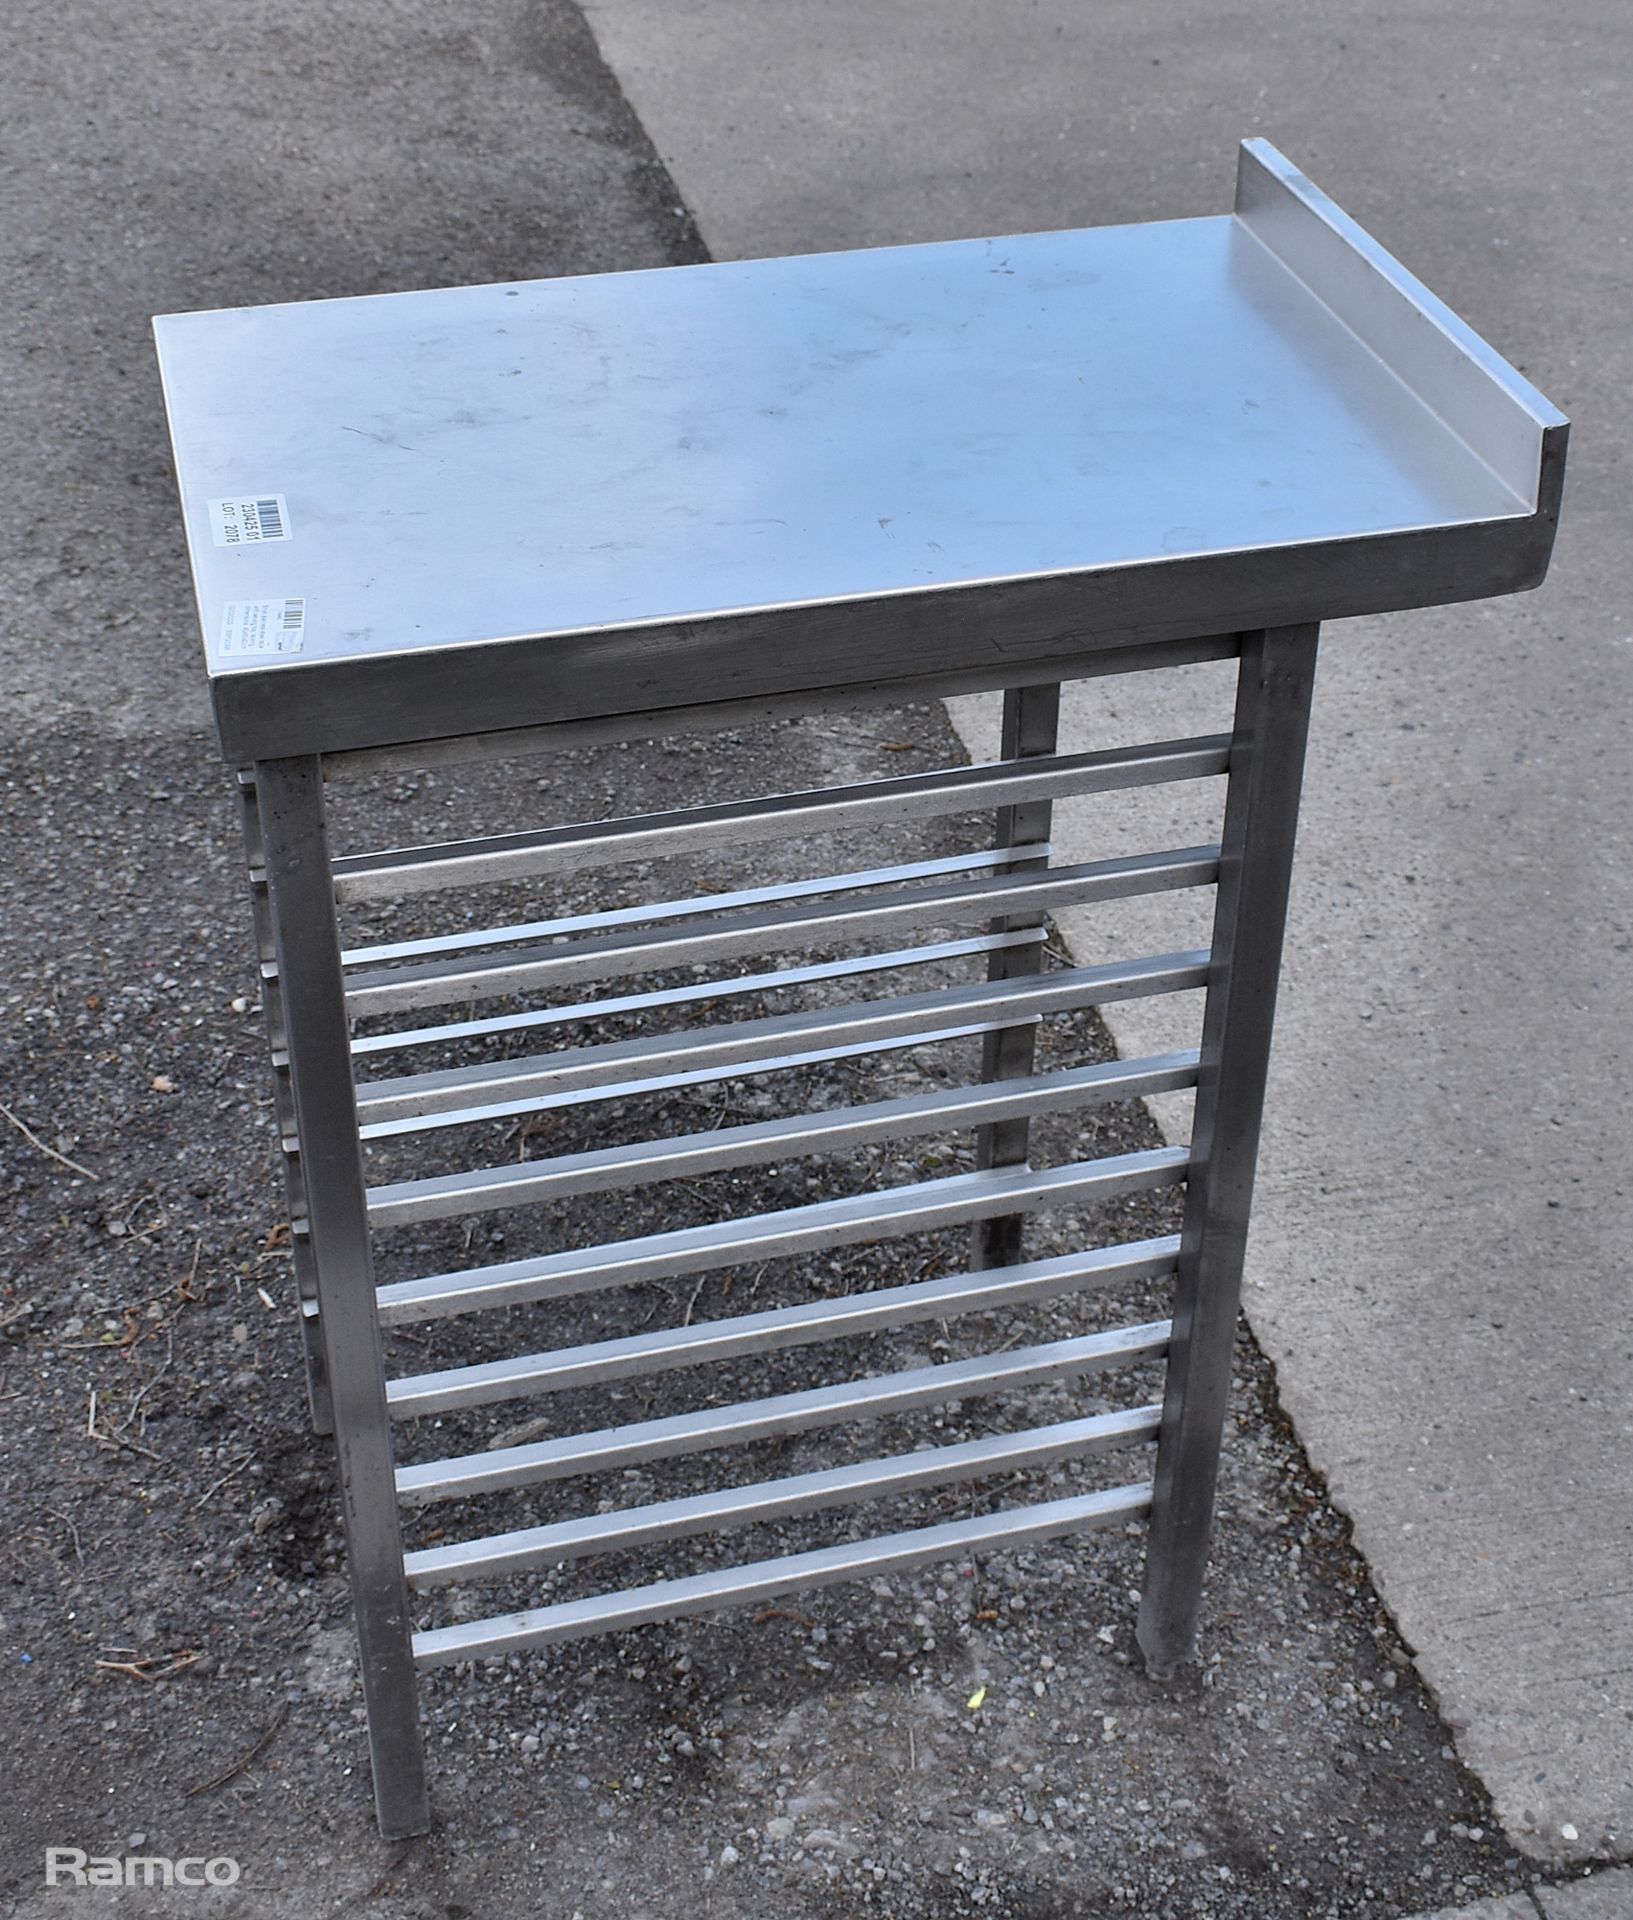 Small stainless steel table with serving tray racking - dimensions: 40 x 65 x 90cm - Image 3 of 3